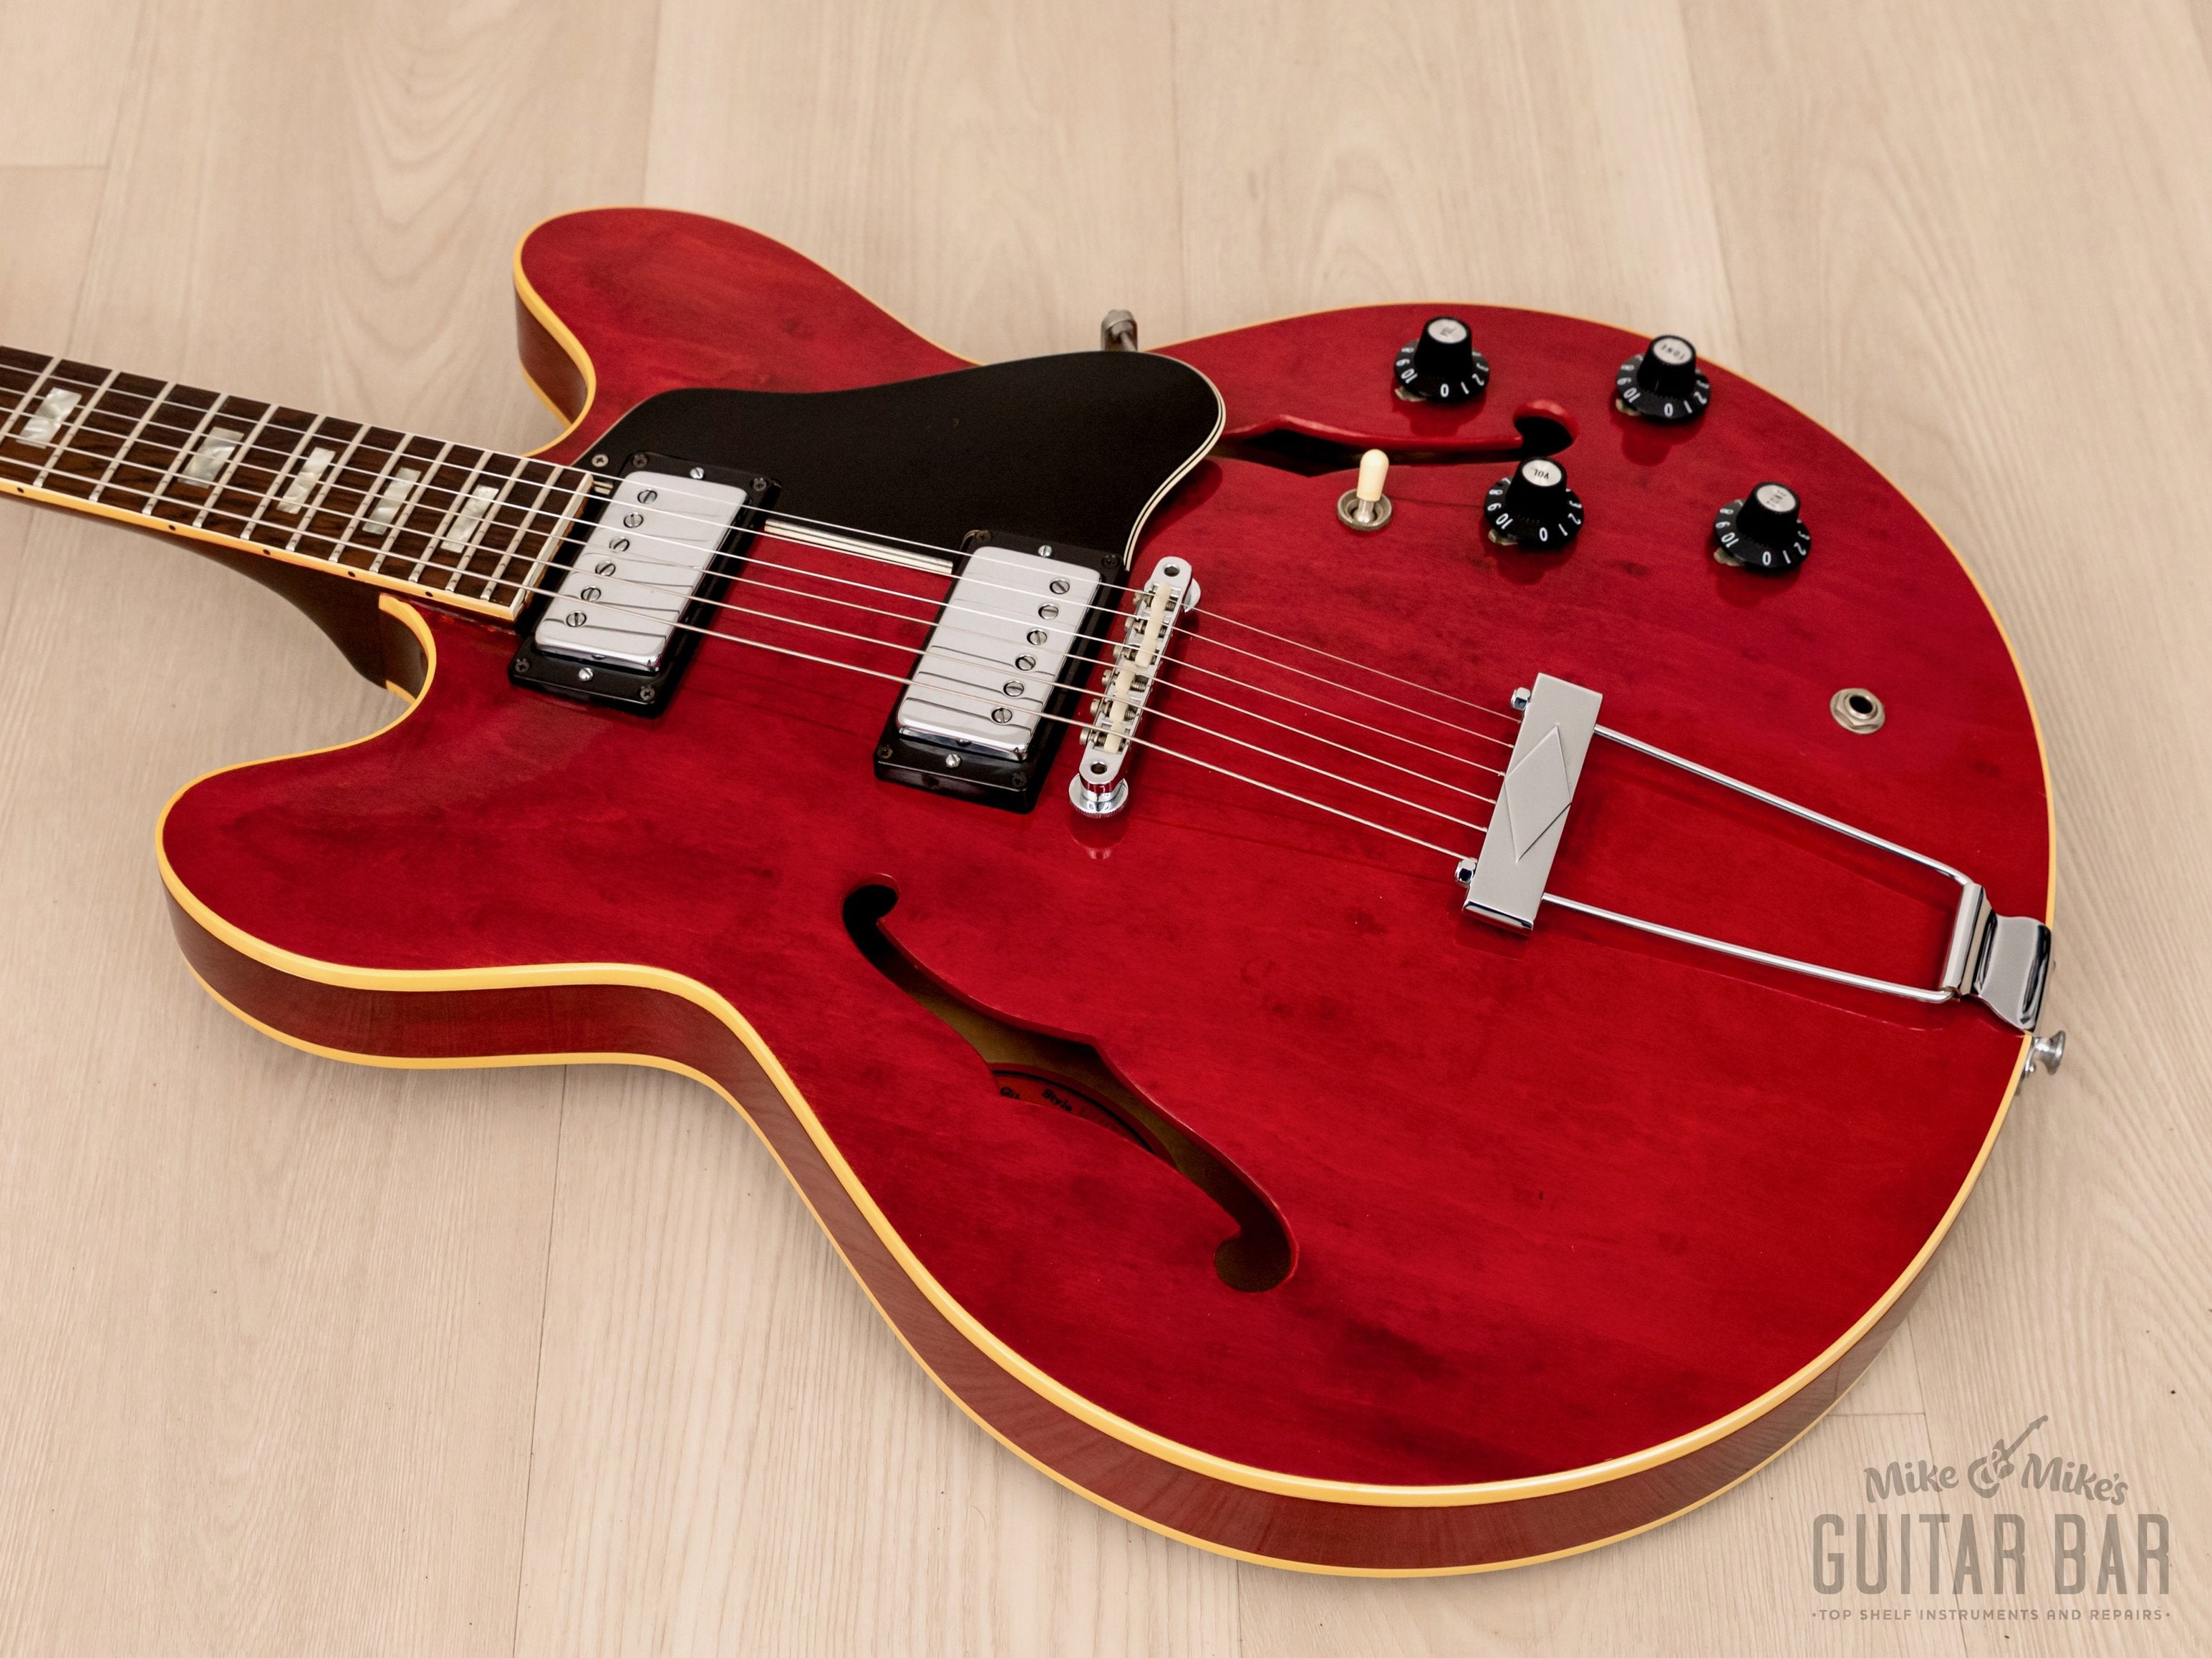 1968 Gibson ES-335 TDC Vintage Electric Guitar Cherry w/ Patent Sticker T Tops, Case